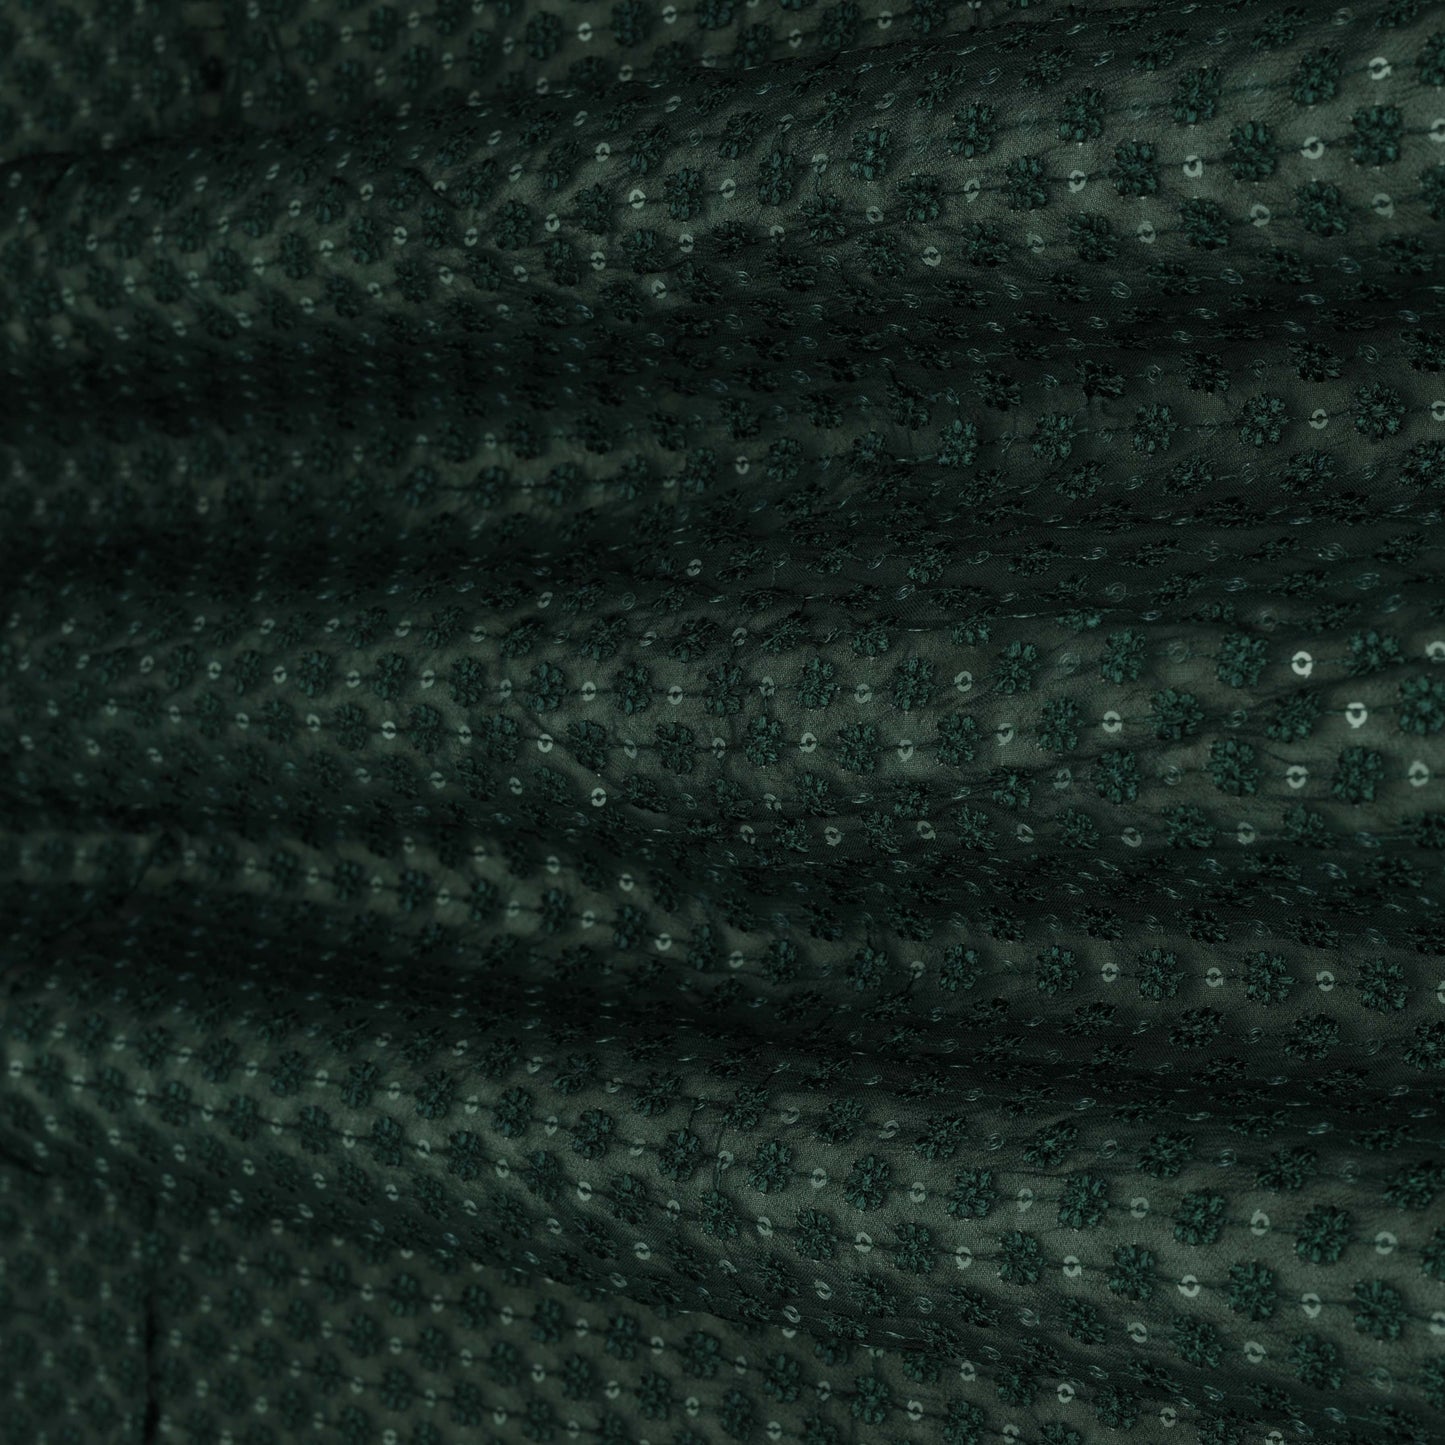 Bottle Green Colored Georgette Embroidery Fabric